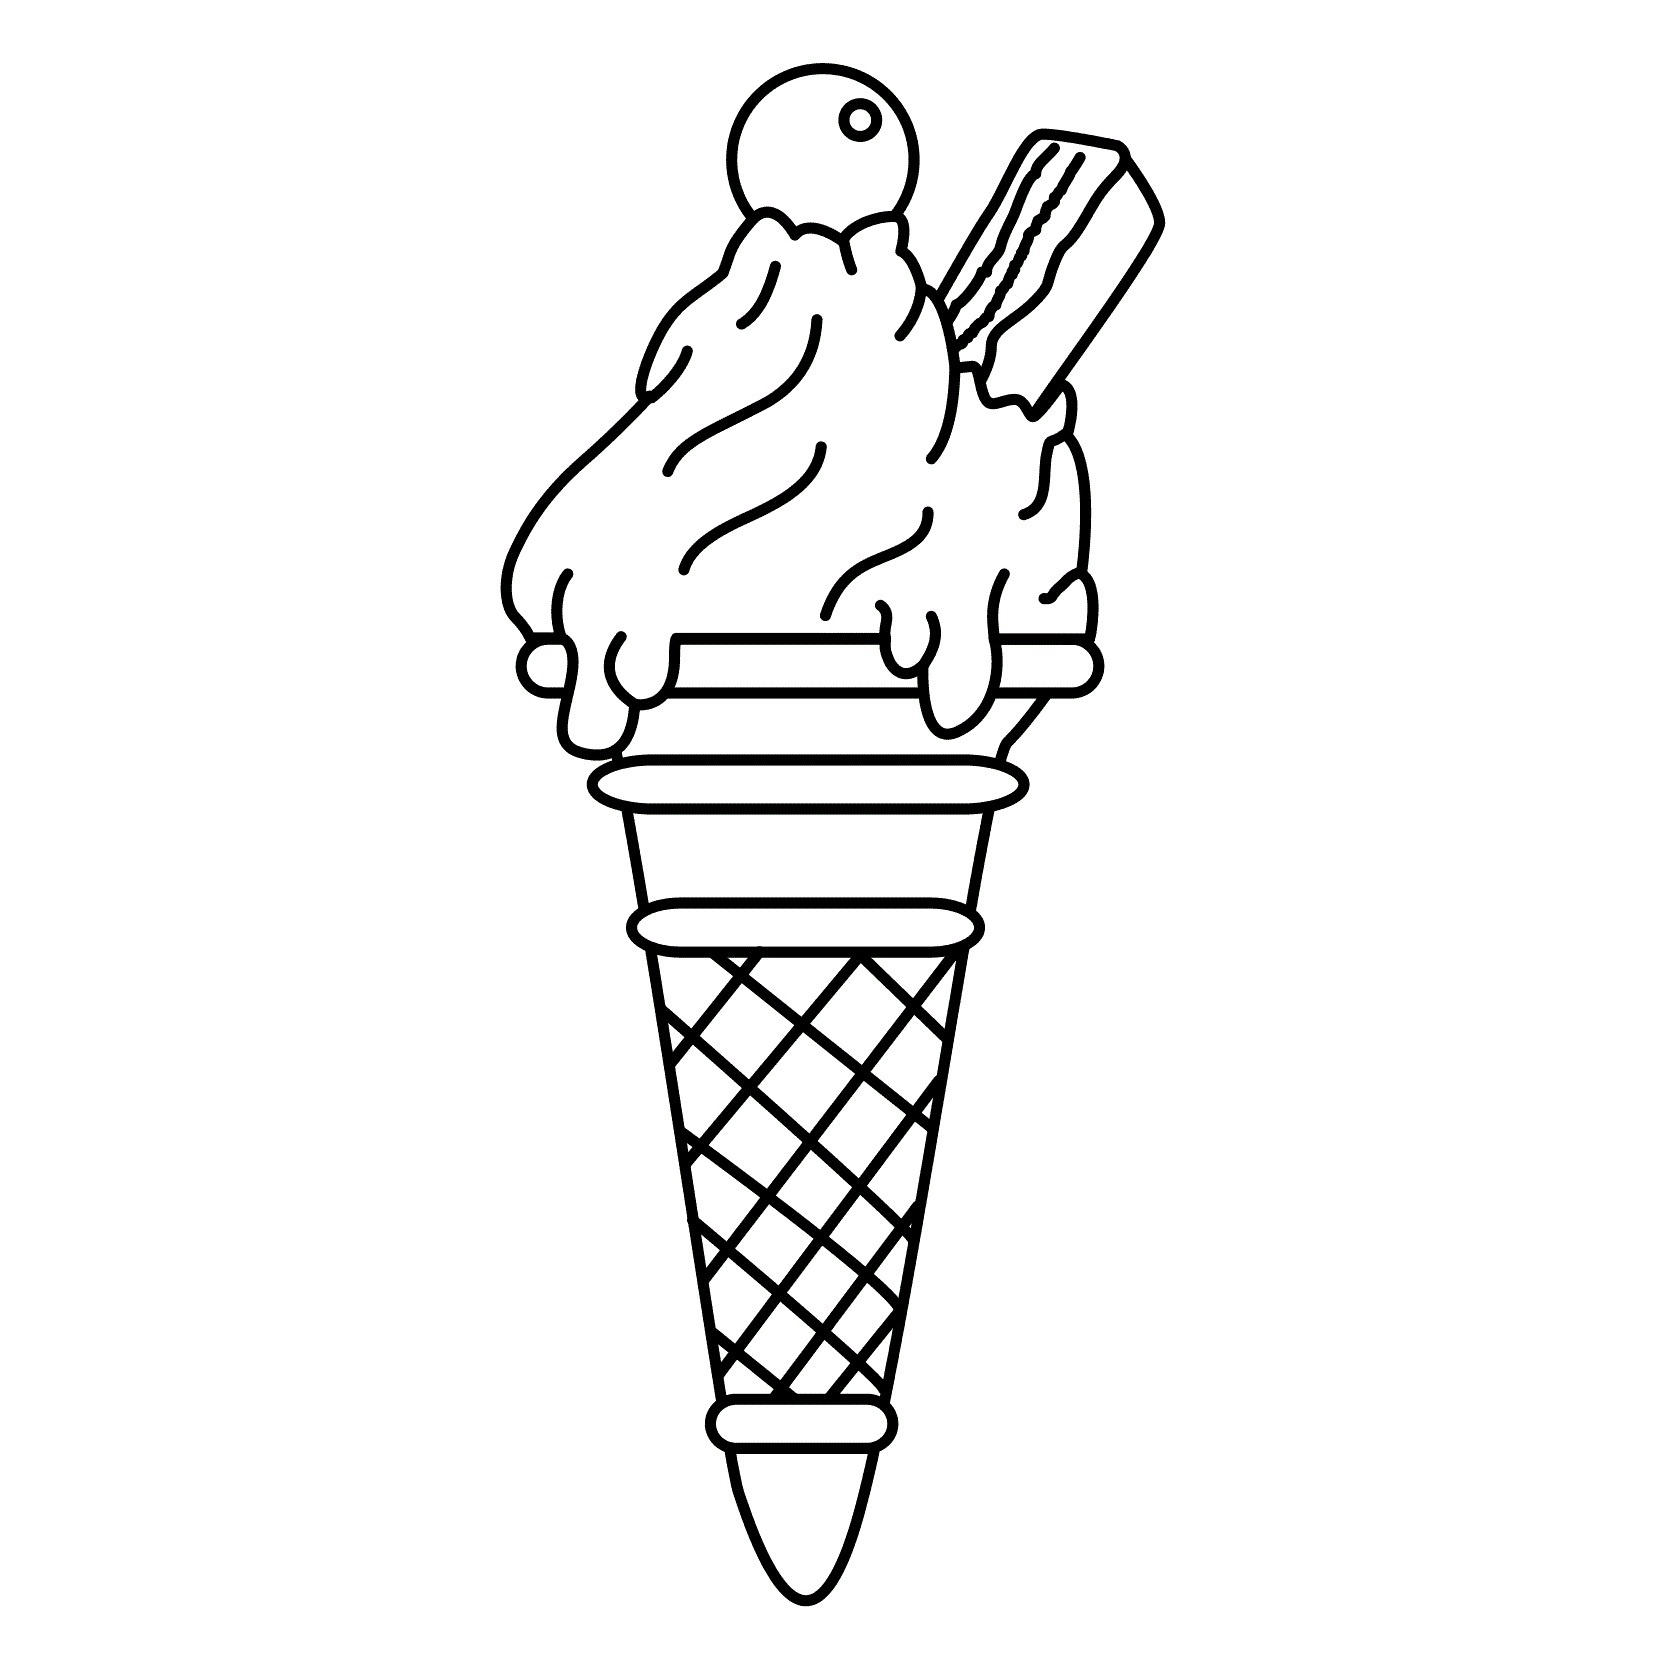 Free Printable Ice Cream Coloring Pages For Kids - Ice Cream Color Pages Printable Free